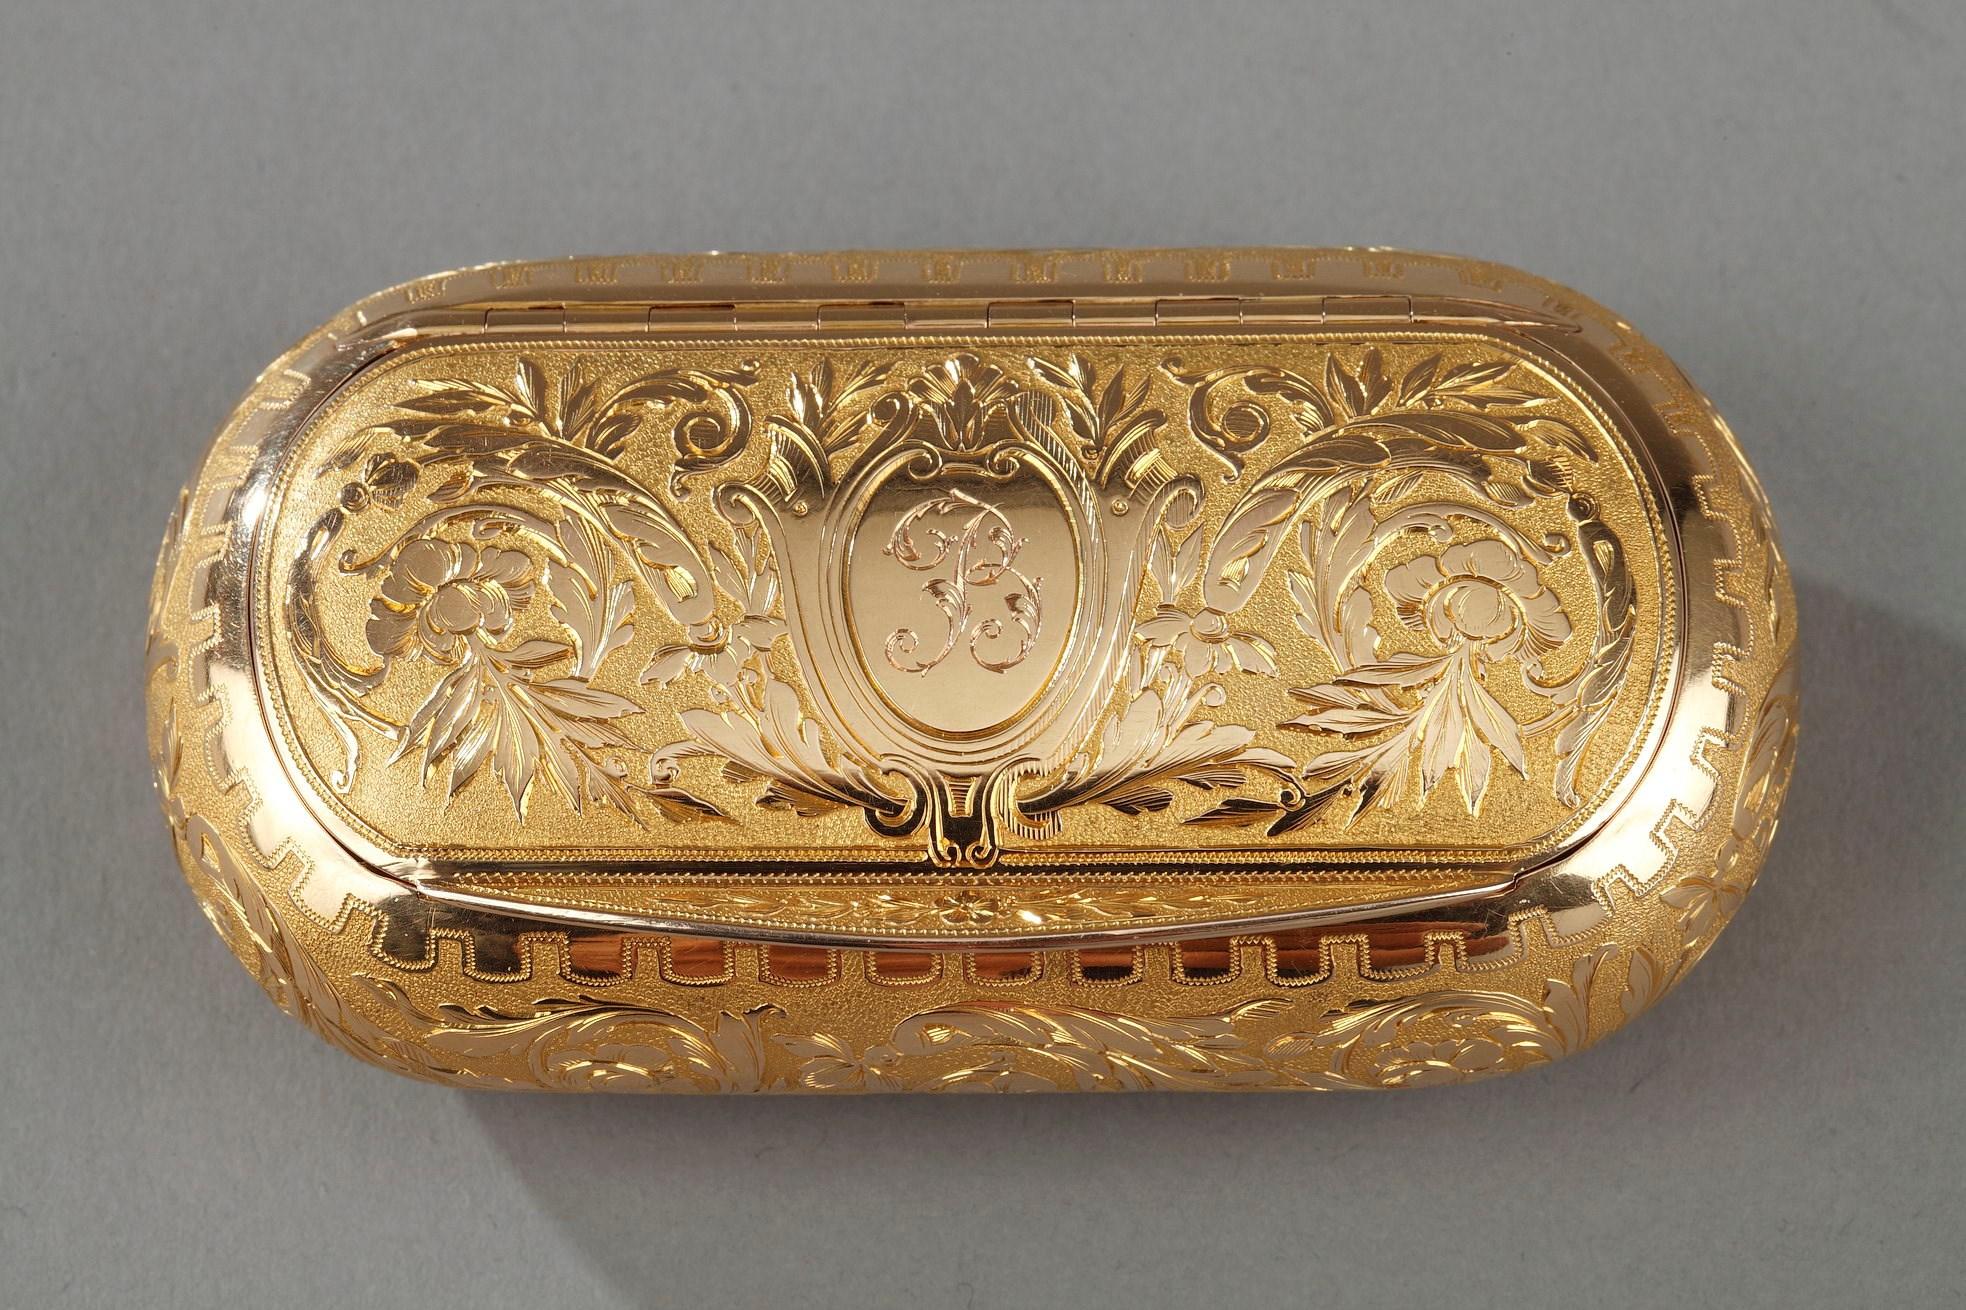 Golden snuff box oblong shape. The hinged lid is finely chiseled. The decor of foliage and flowers is organized on either side of a medallion central to the number B. The decor presents a game of Amati gold and bright gold characteristic of the